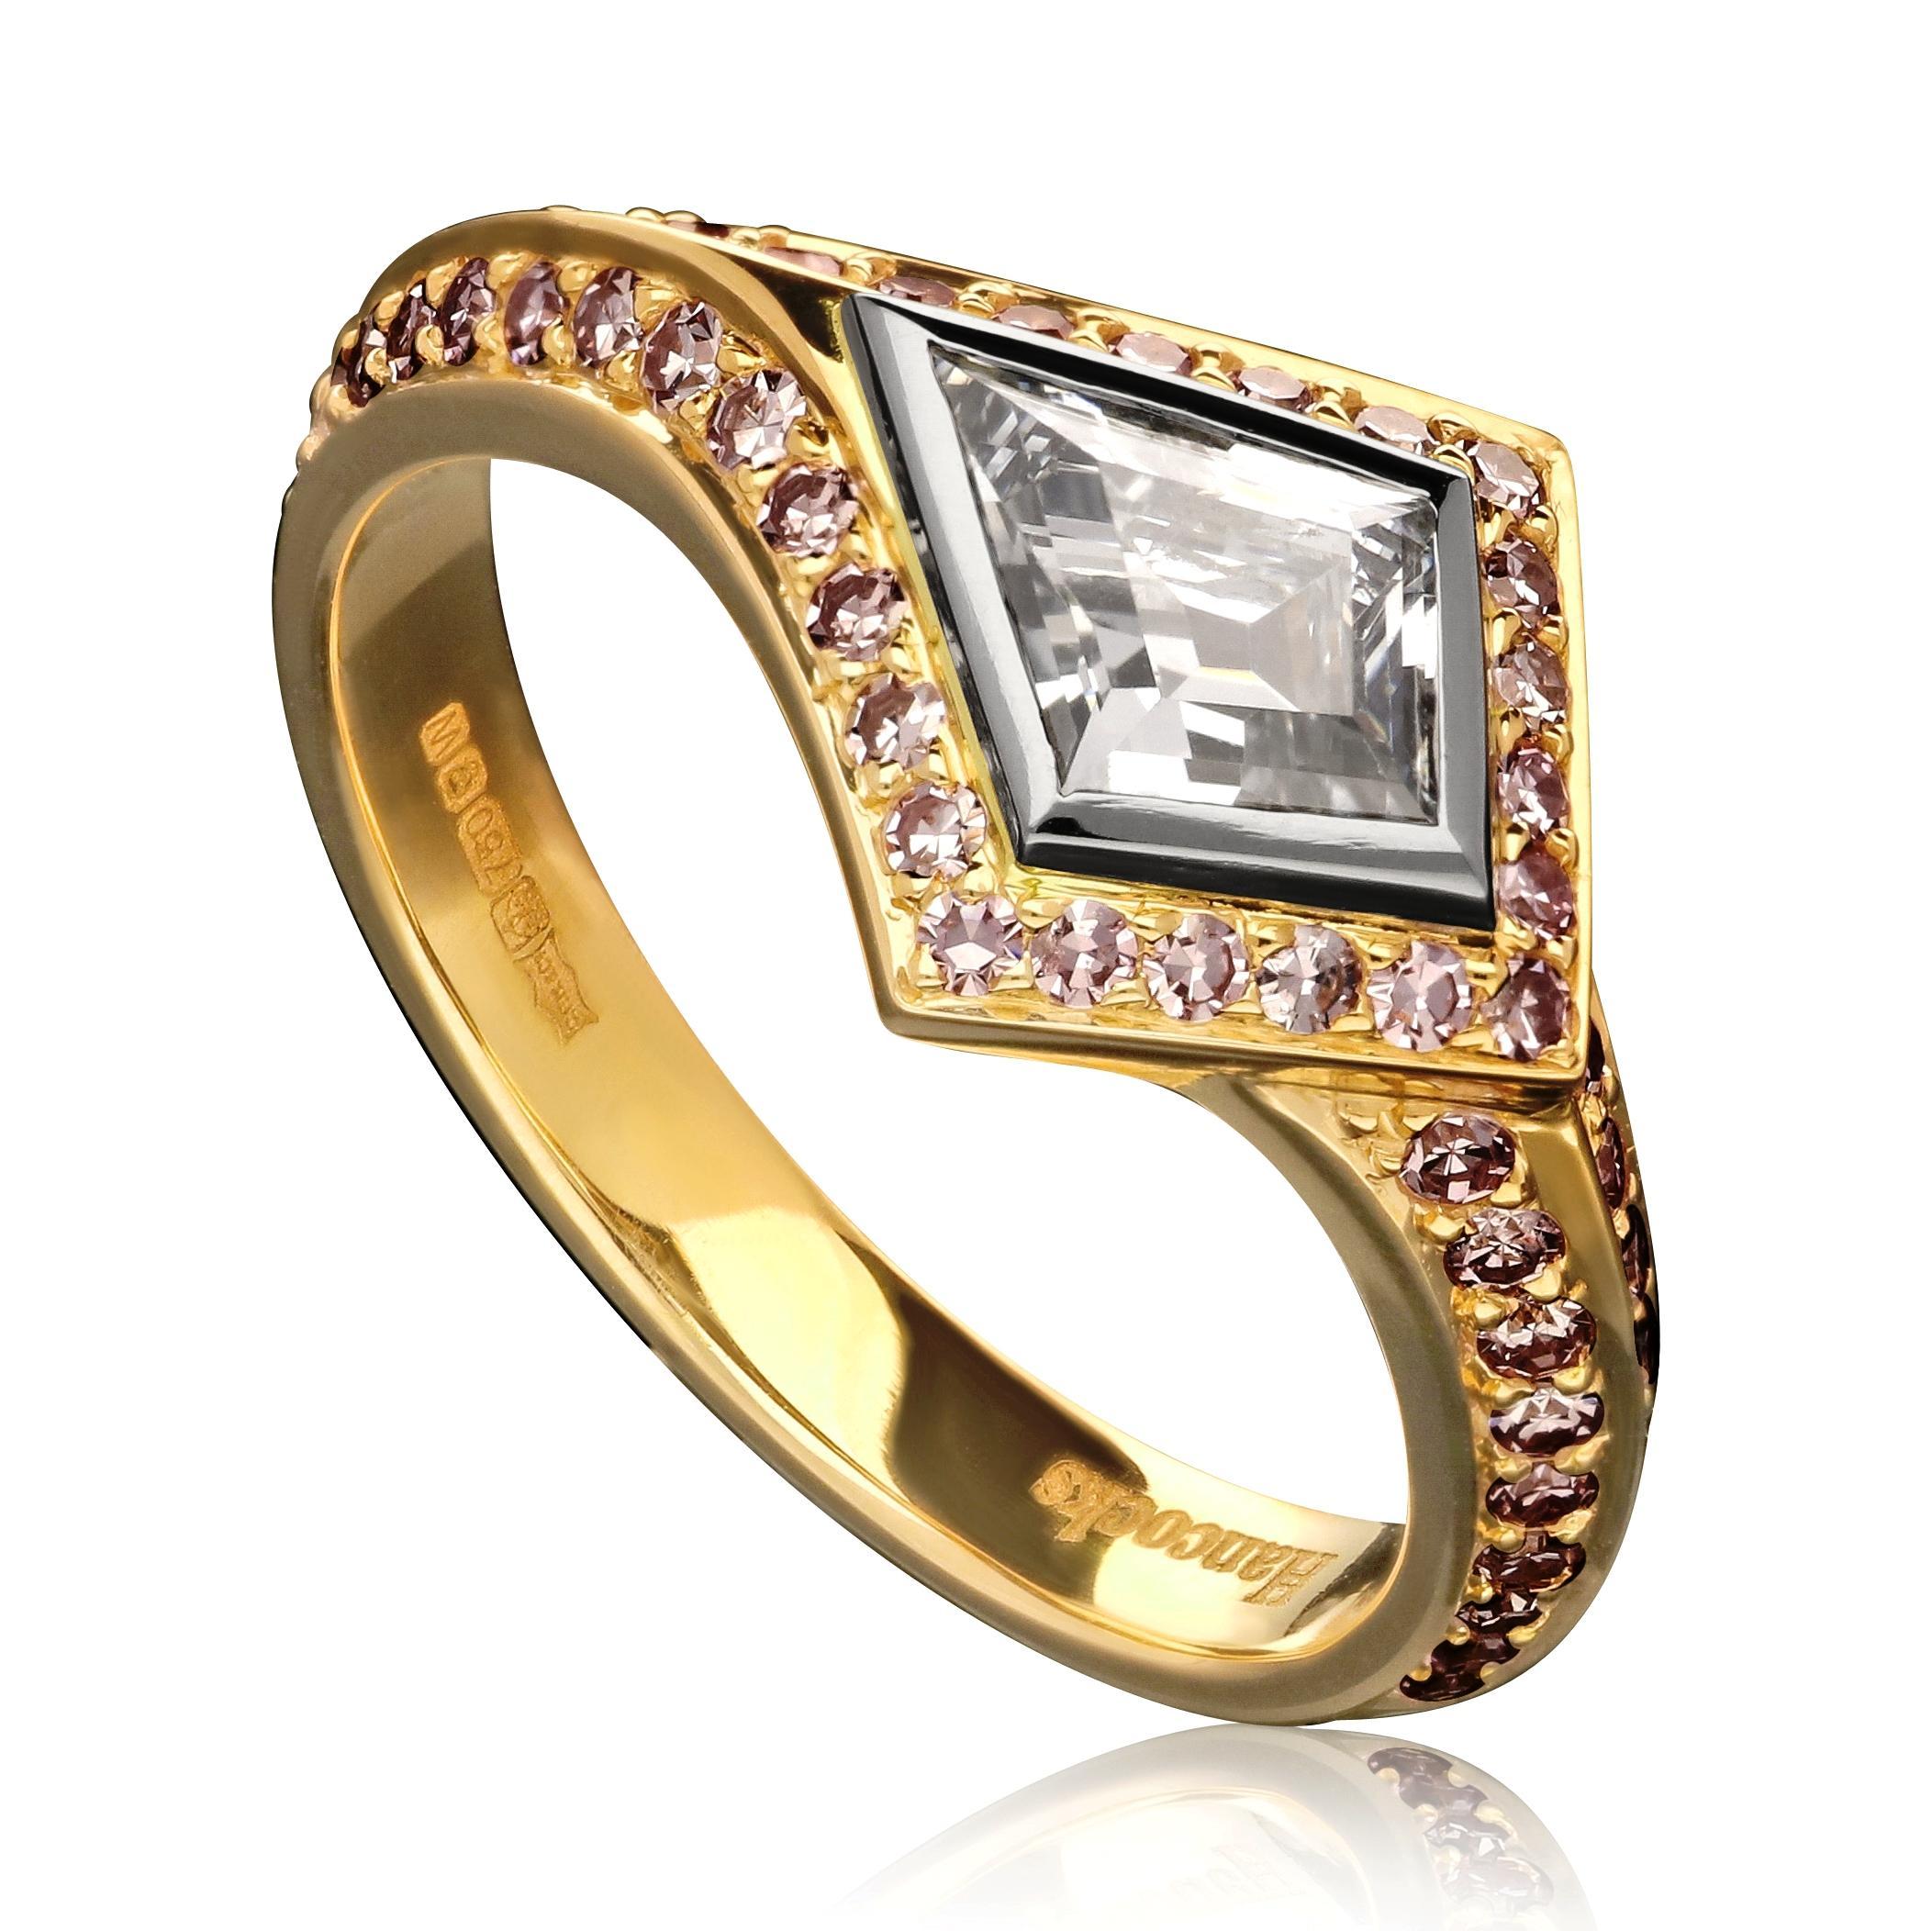 Description
An elegant and unusual fancy coloured diamond and gold ring by Hancocks, centred with a kite-shape step-cut diamond weighing 0.62cts and of Fancy Grey-Blue colour and SI1 clarity rub over set in platinum horizontally placed across the